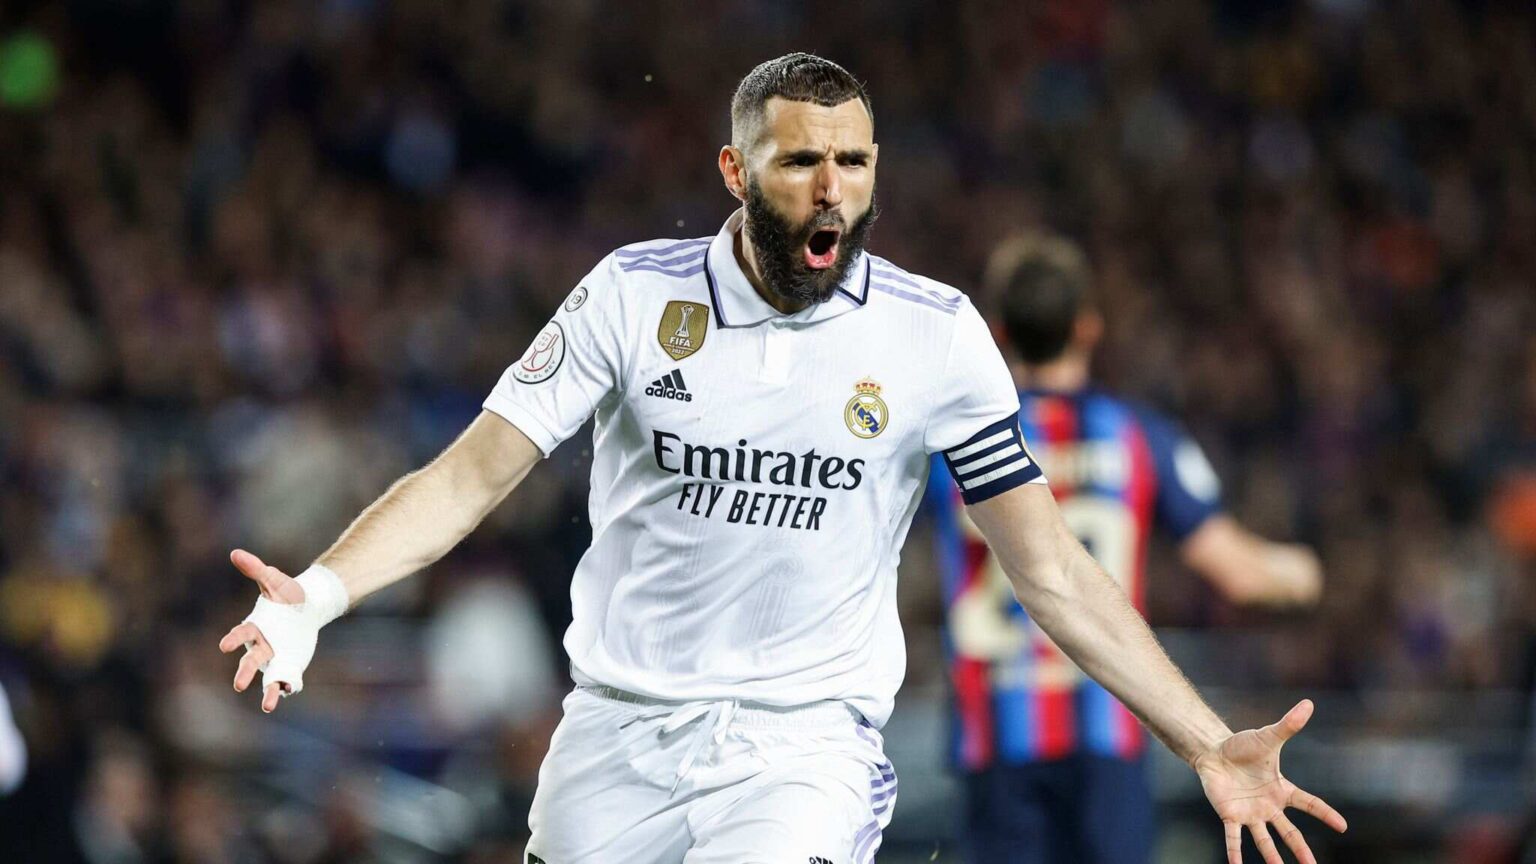 Barcelona 0-4 Real Madrid (1-4 agg) Barcelona out as Real Madrid reach the Copa del Rey final